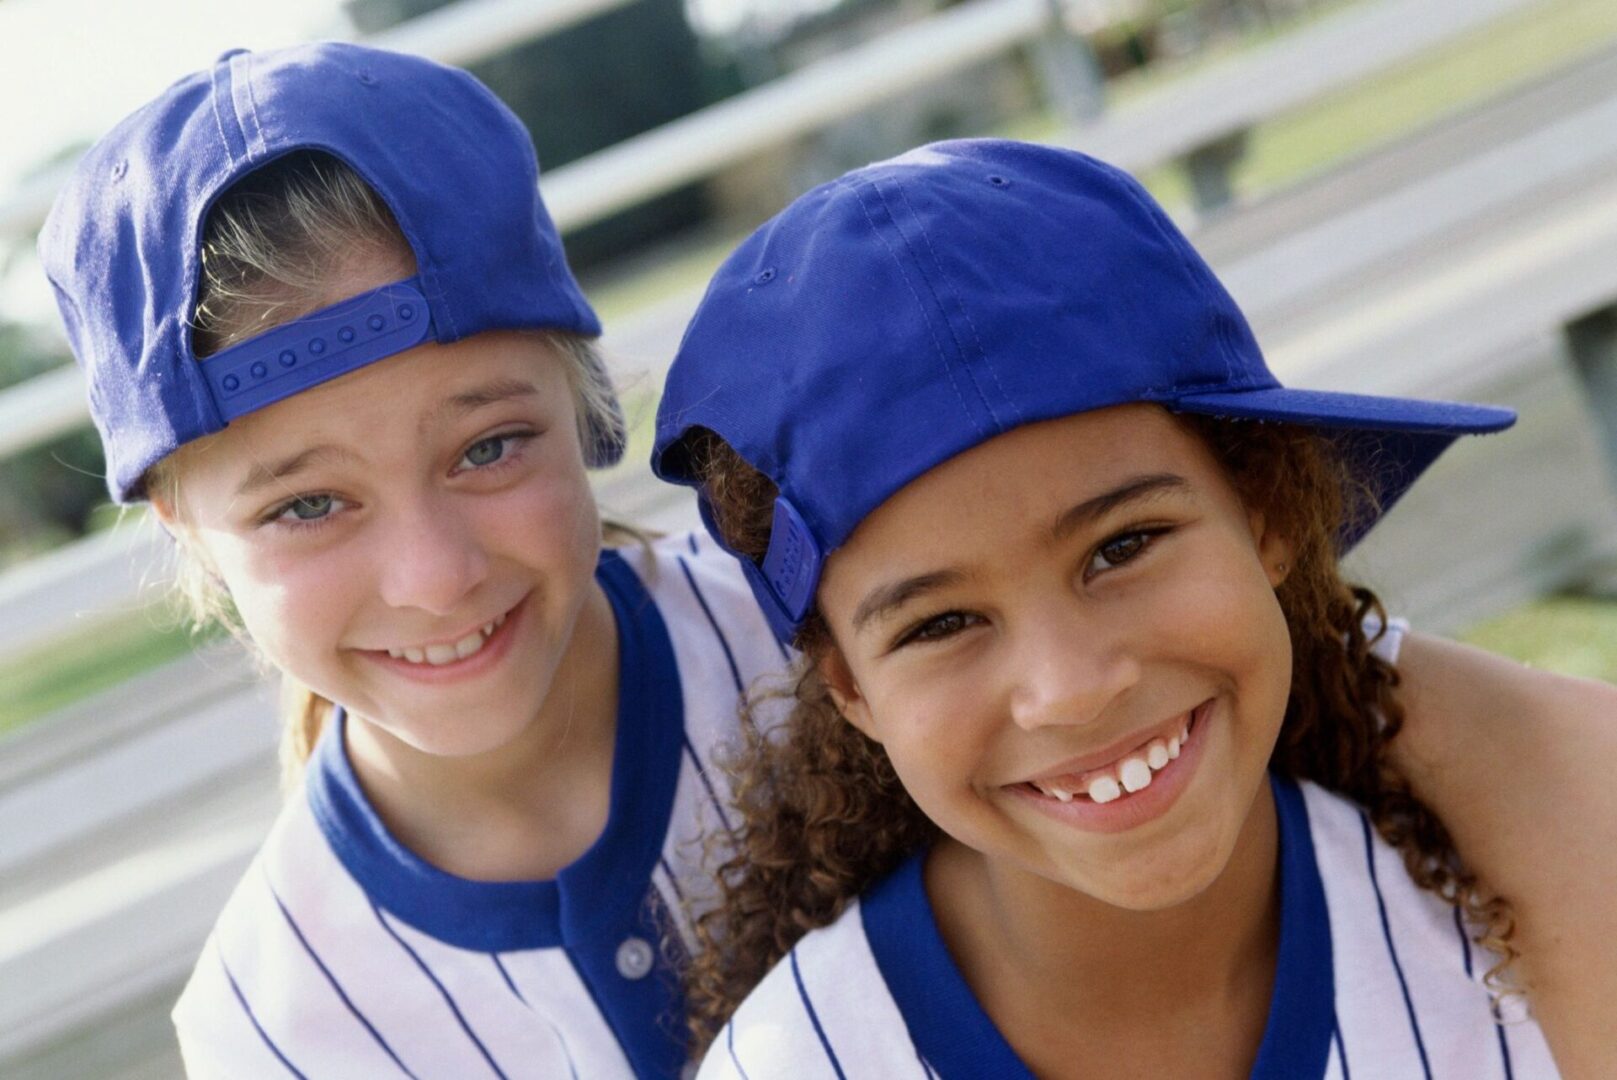 Two young girls in baseball uniforms and hats.